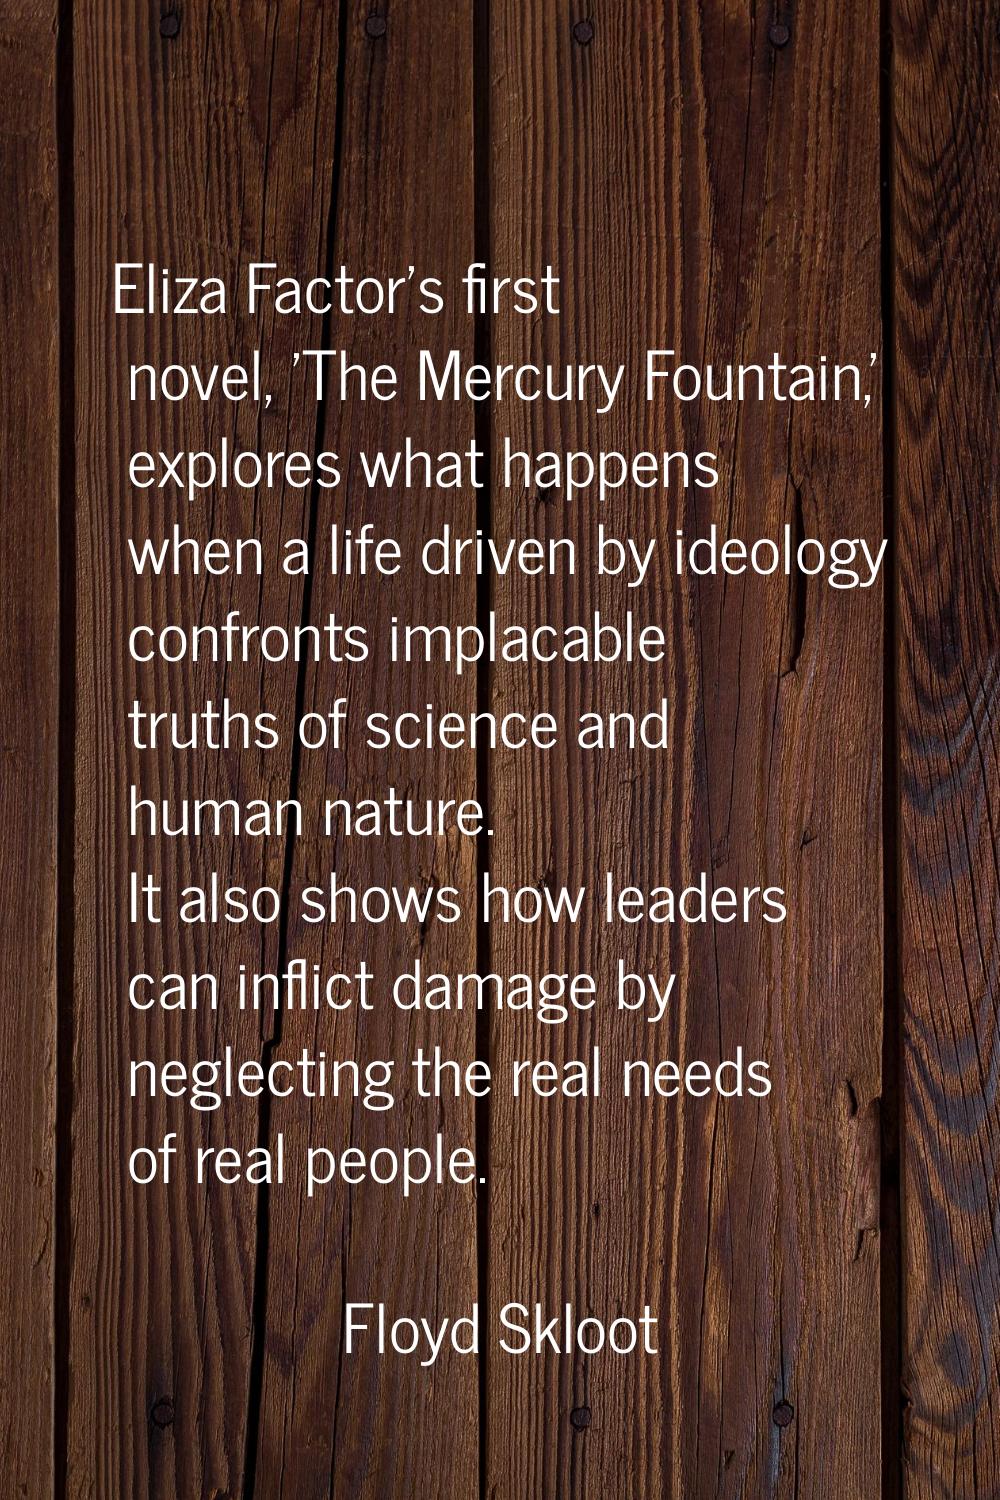 Eliza Factor's first novel, 'The Mercury Fountain,' explores what happens when a life driven by ide